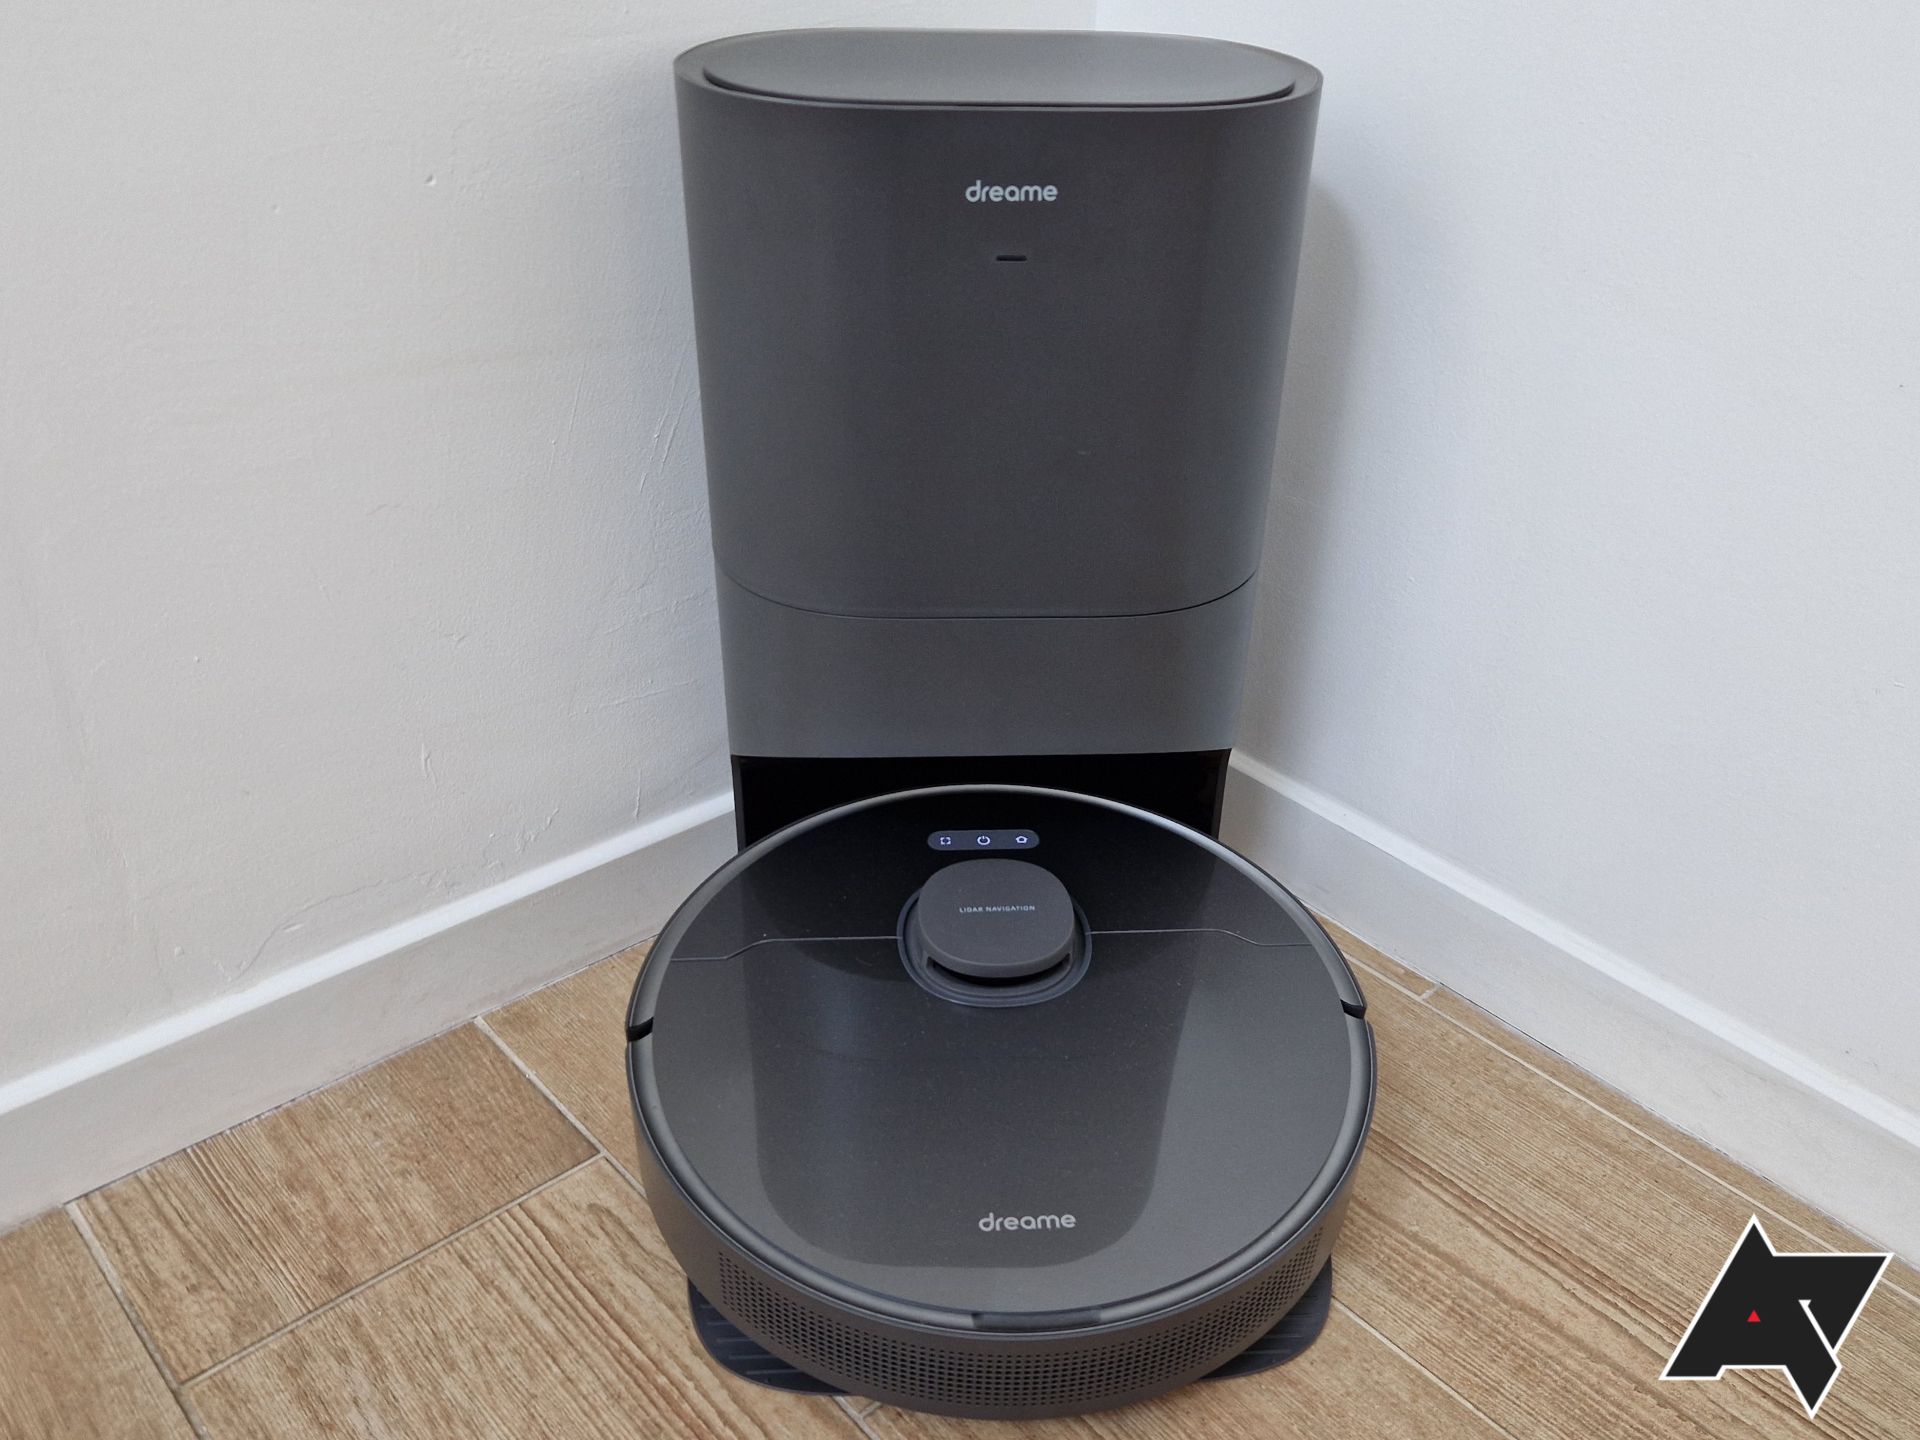 Dreame Bot D10 Plus Review: Dreame's CHEAPEST SELF-EMPTYING ROBOT